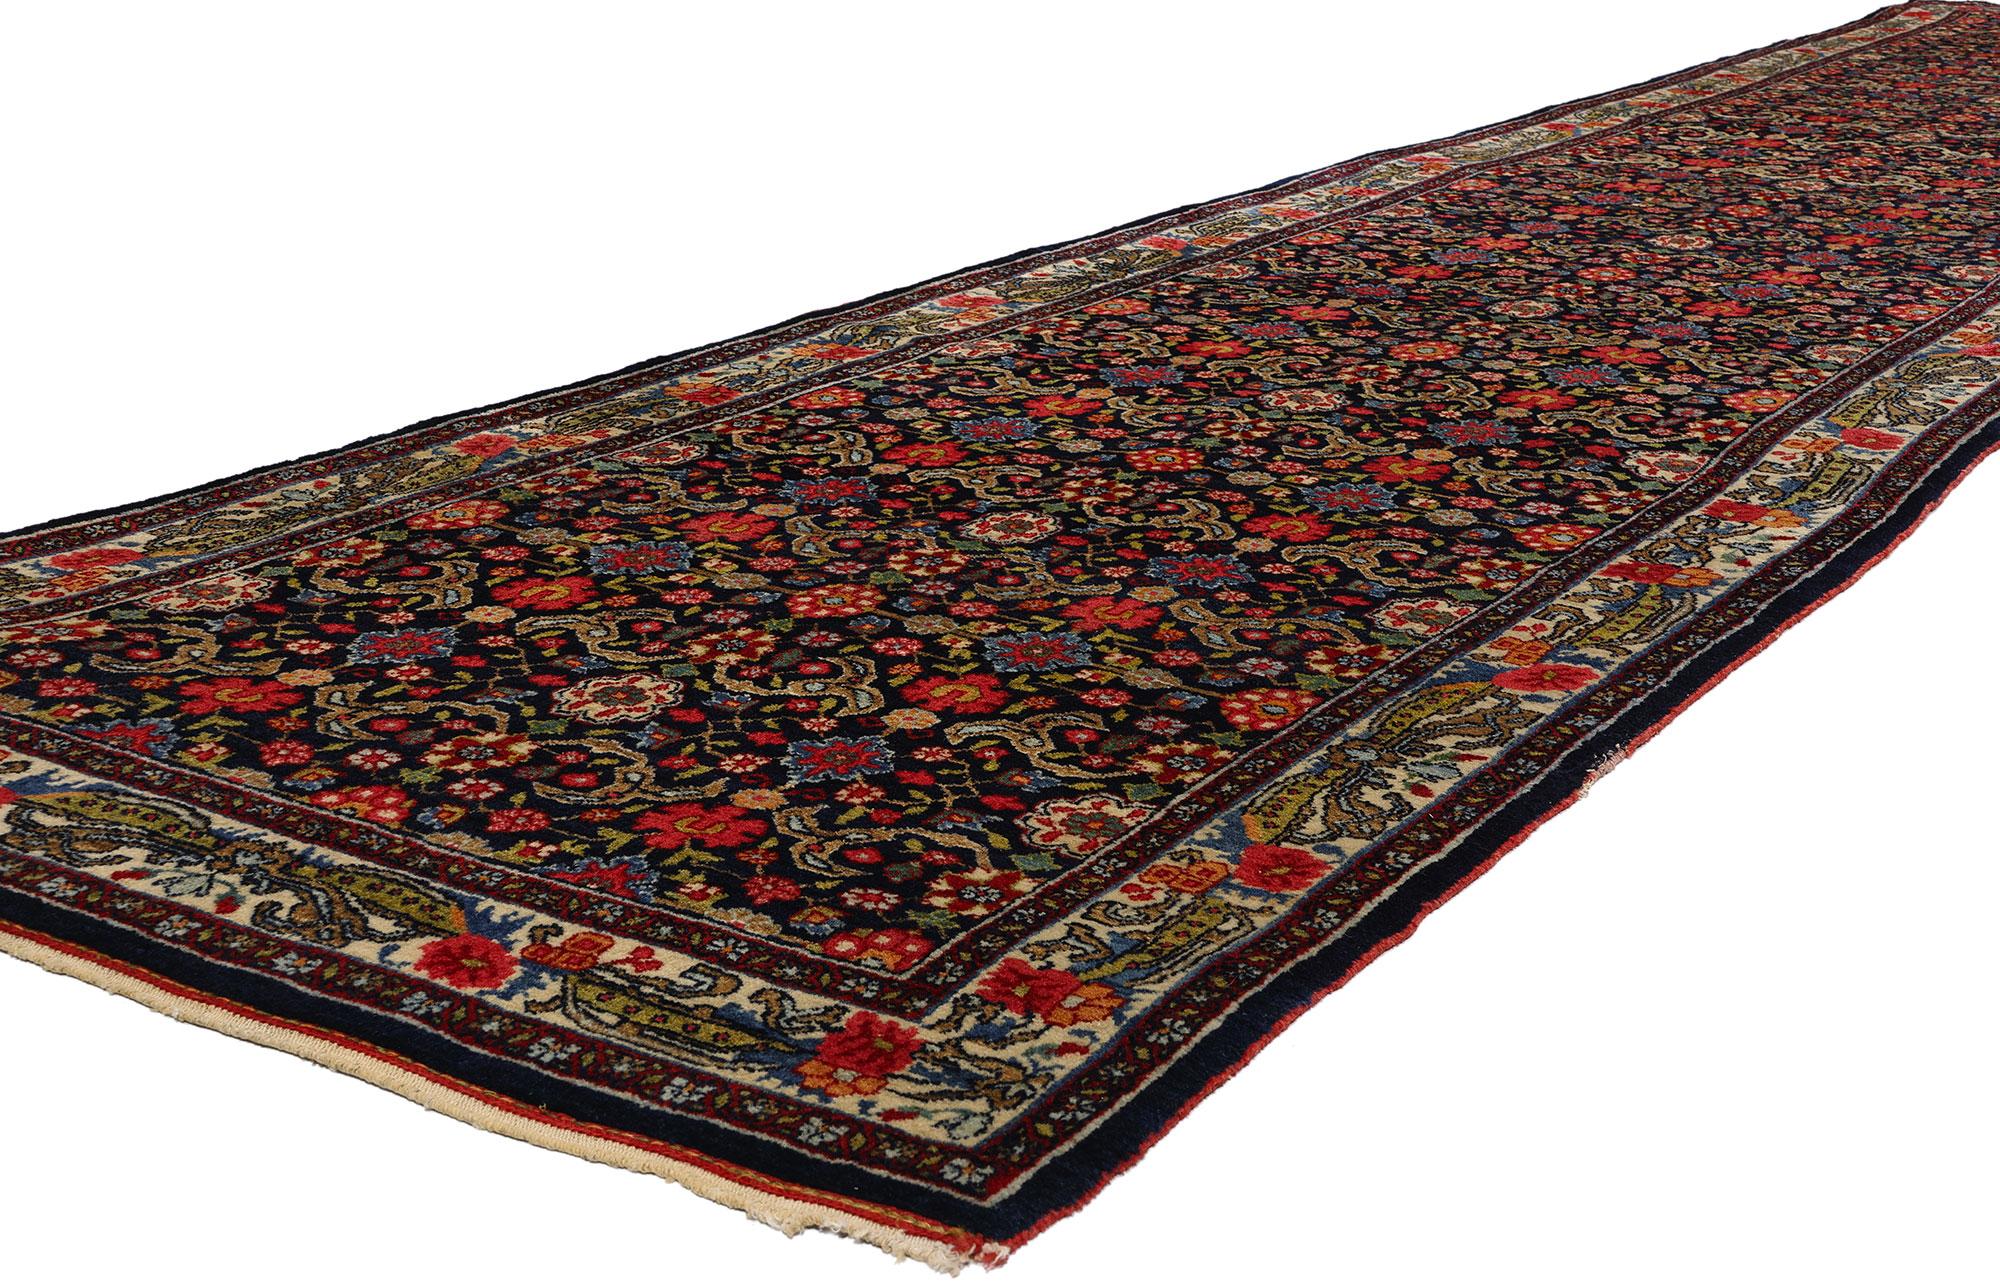 53876 Antique Persian Bijar Rug Runner, 03'08 x 17'09. Persian Bijar carpet runners are intricately woven rugs originating from the town of Bijar in western Iran, renowned for their durability and robustness. Crafted by skilled Kurdish artisans